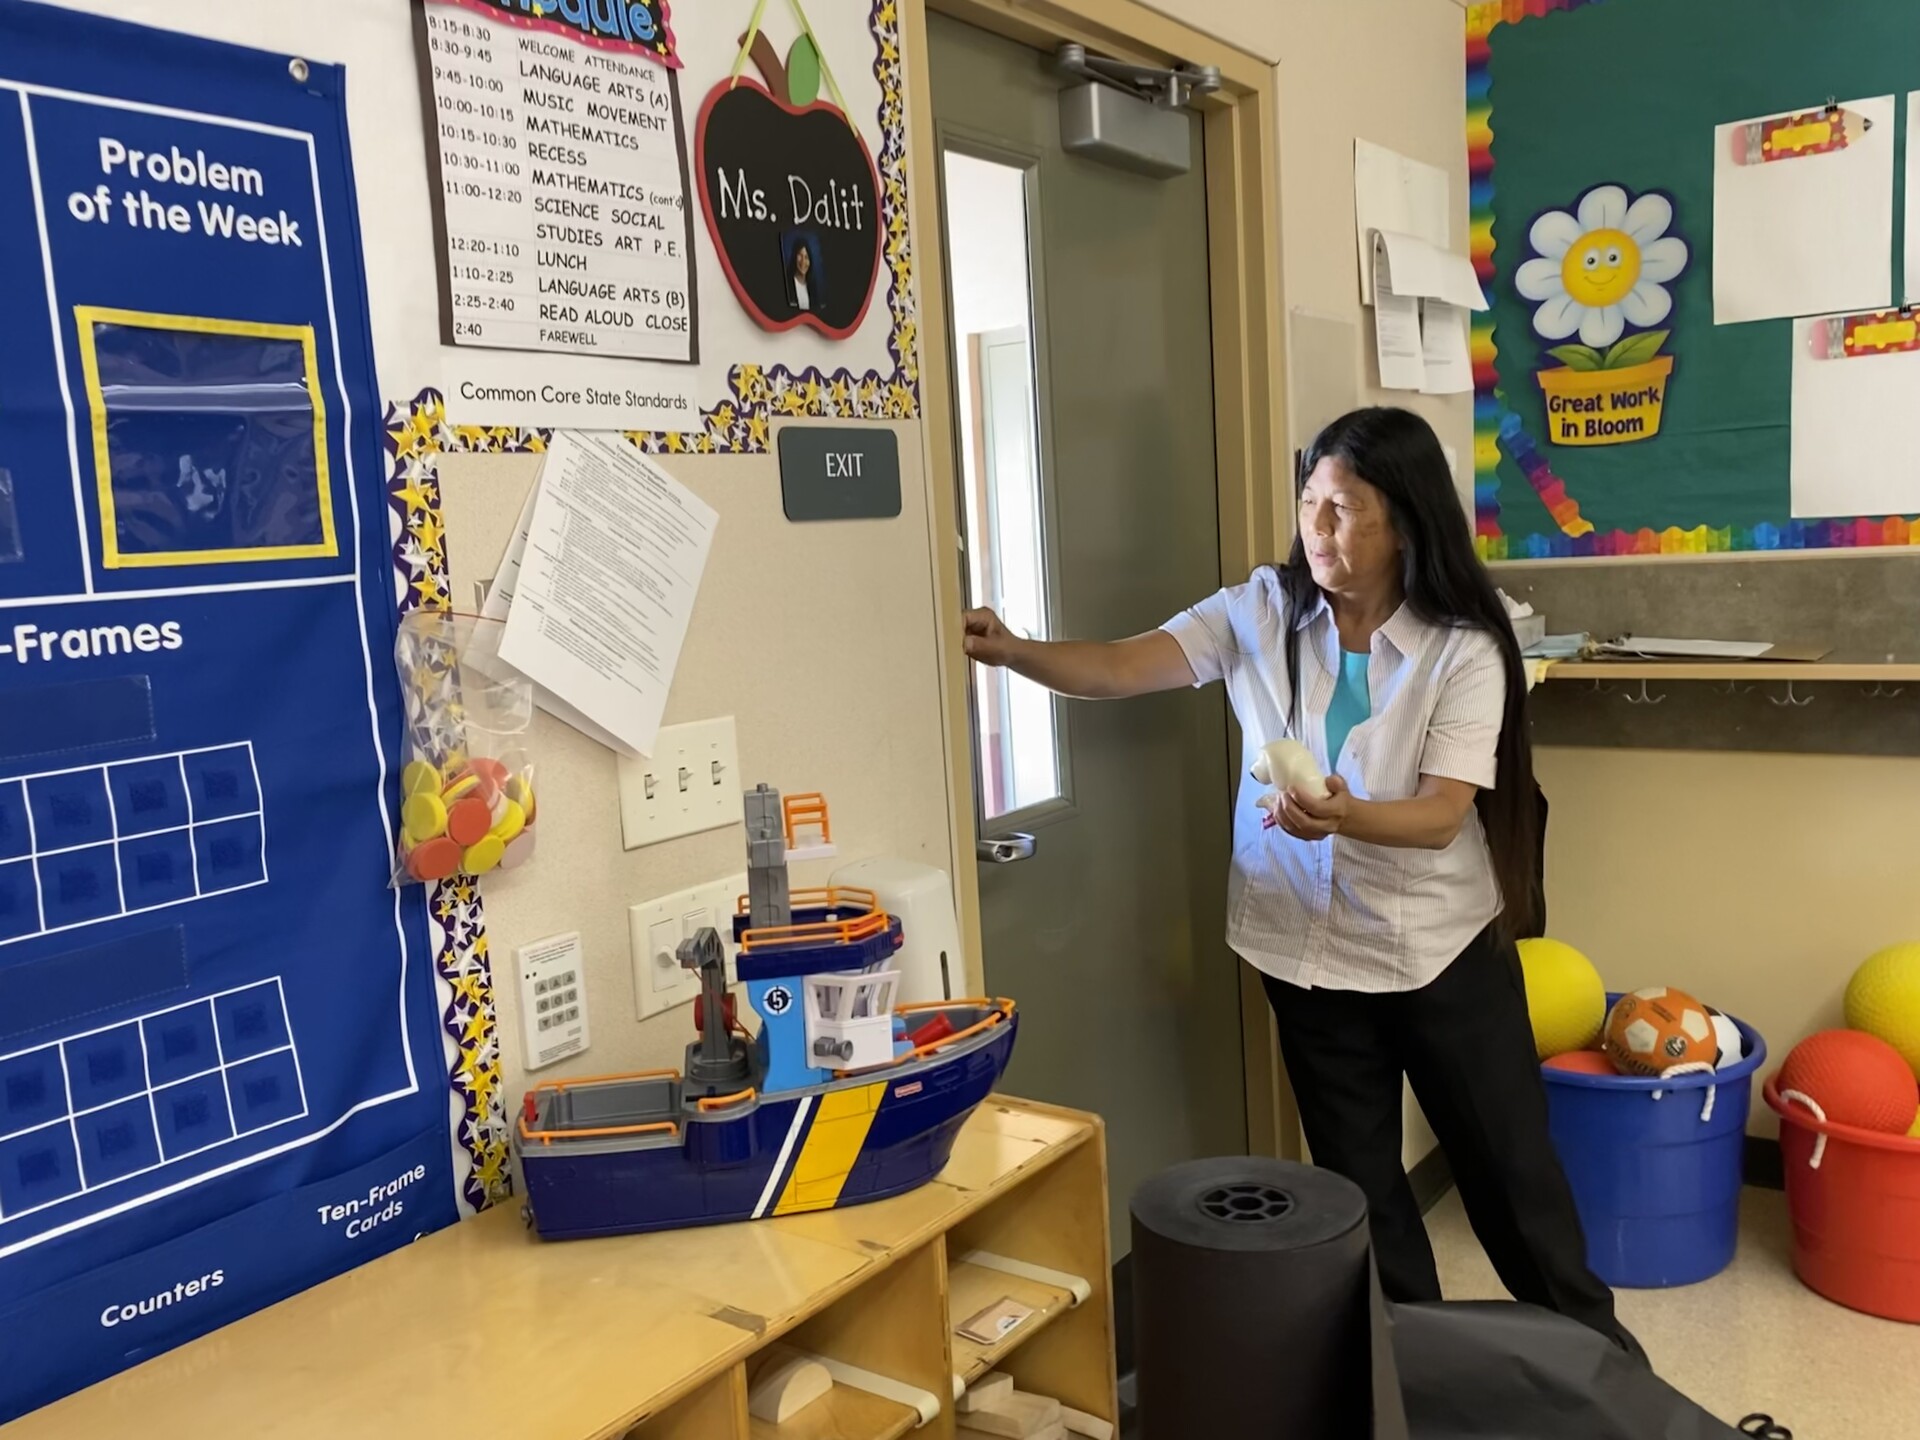 a woman with black hair prepares an elementary school classroom with colorful decorations